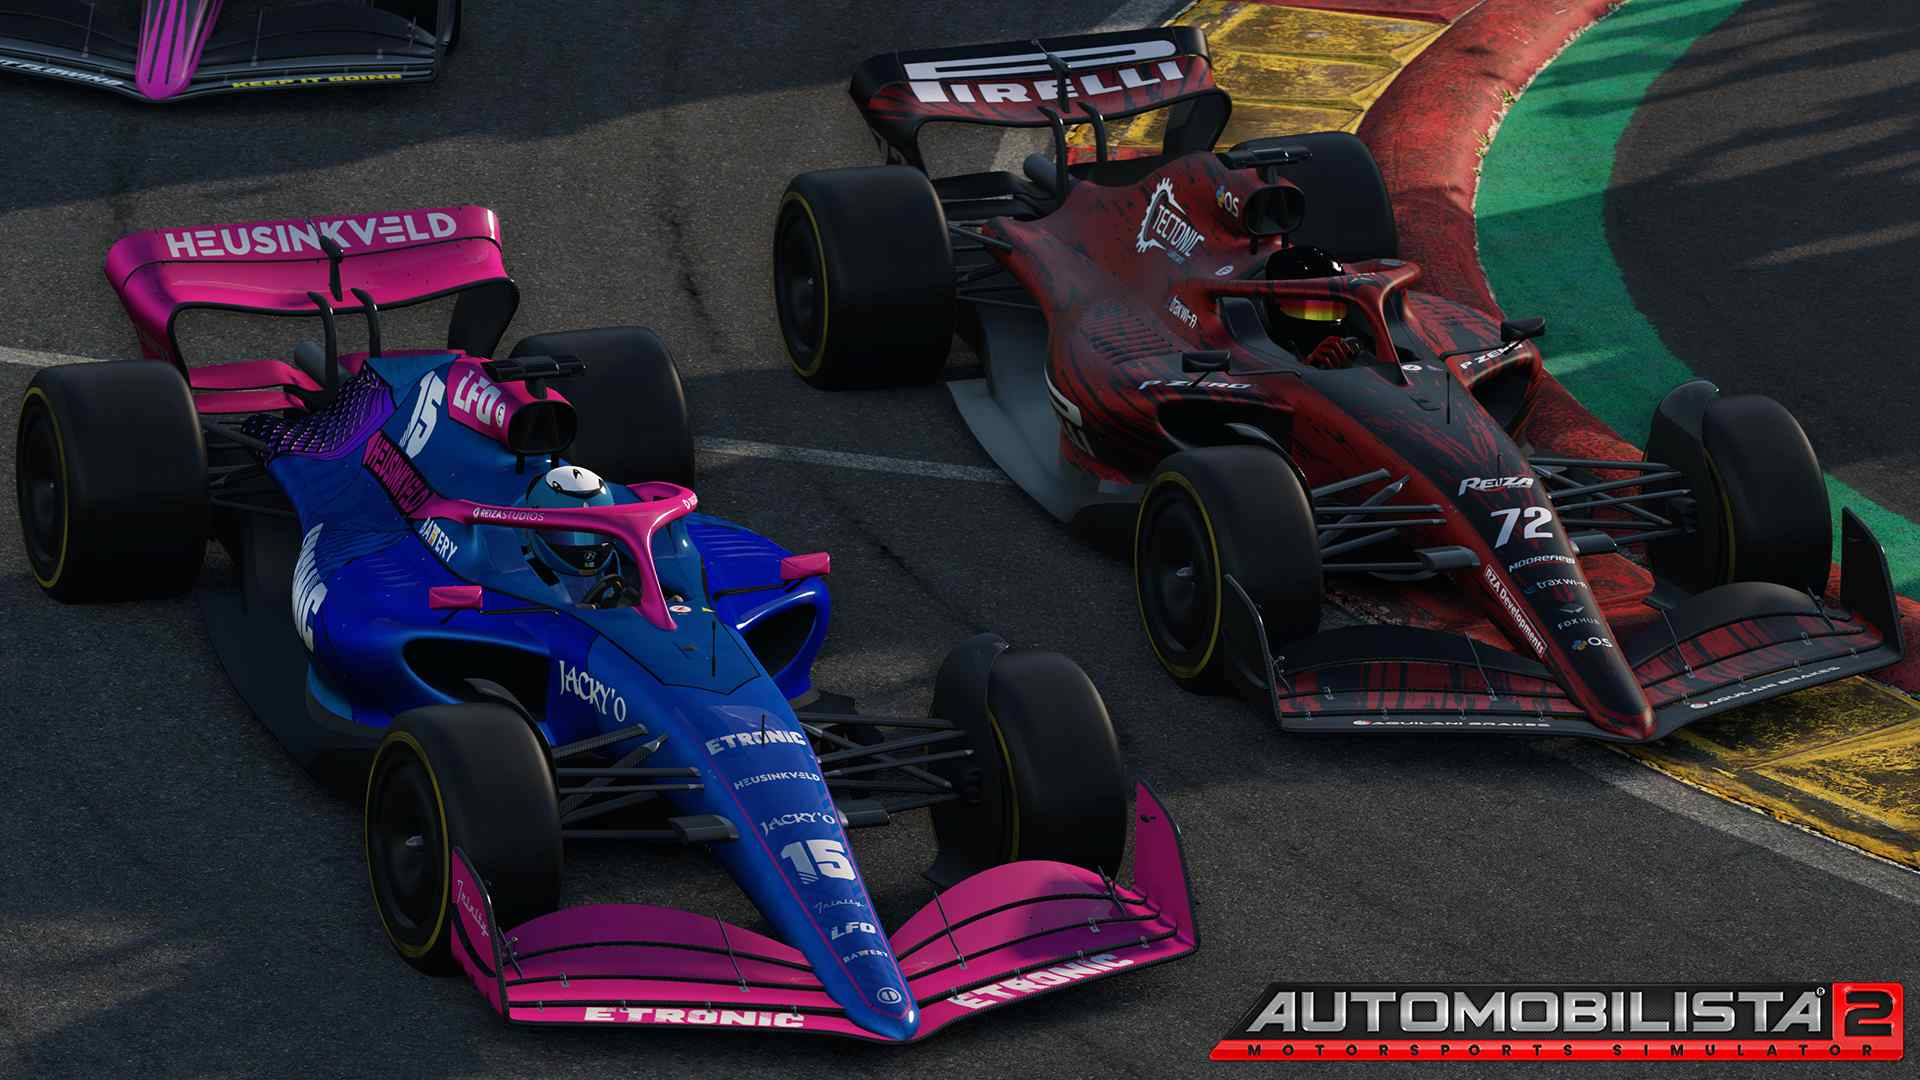 Automobilista 2 Update Incoming, Page 3